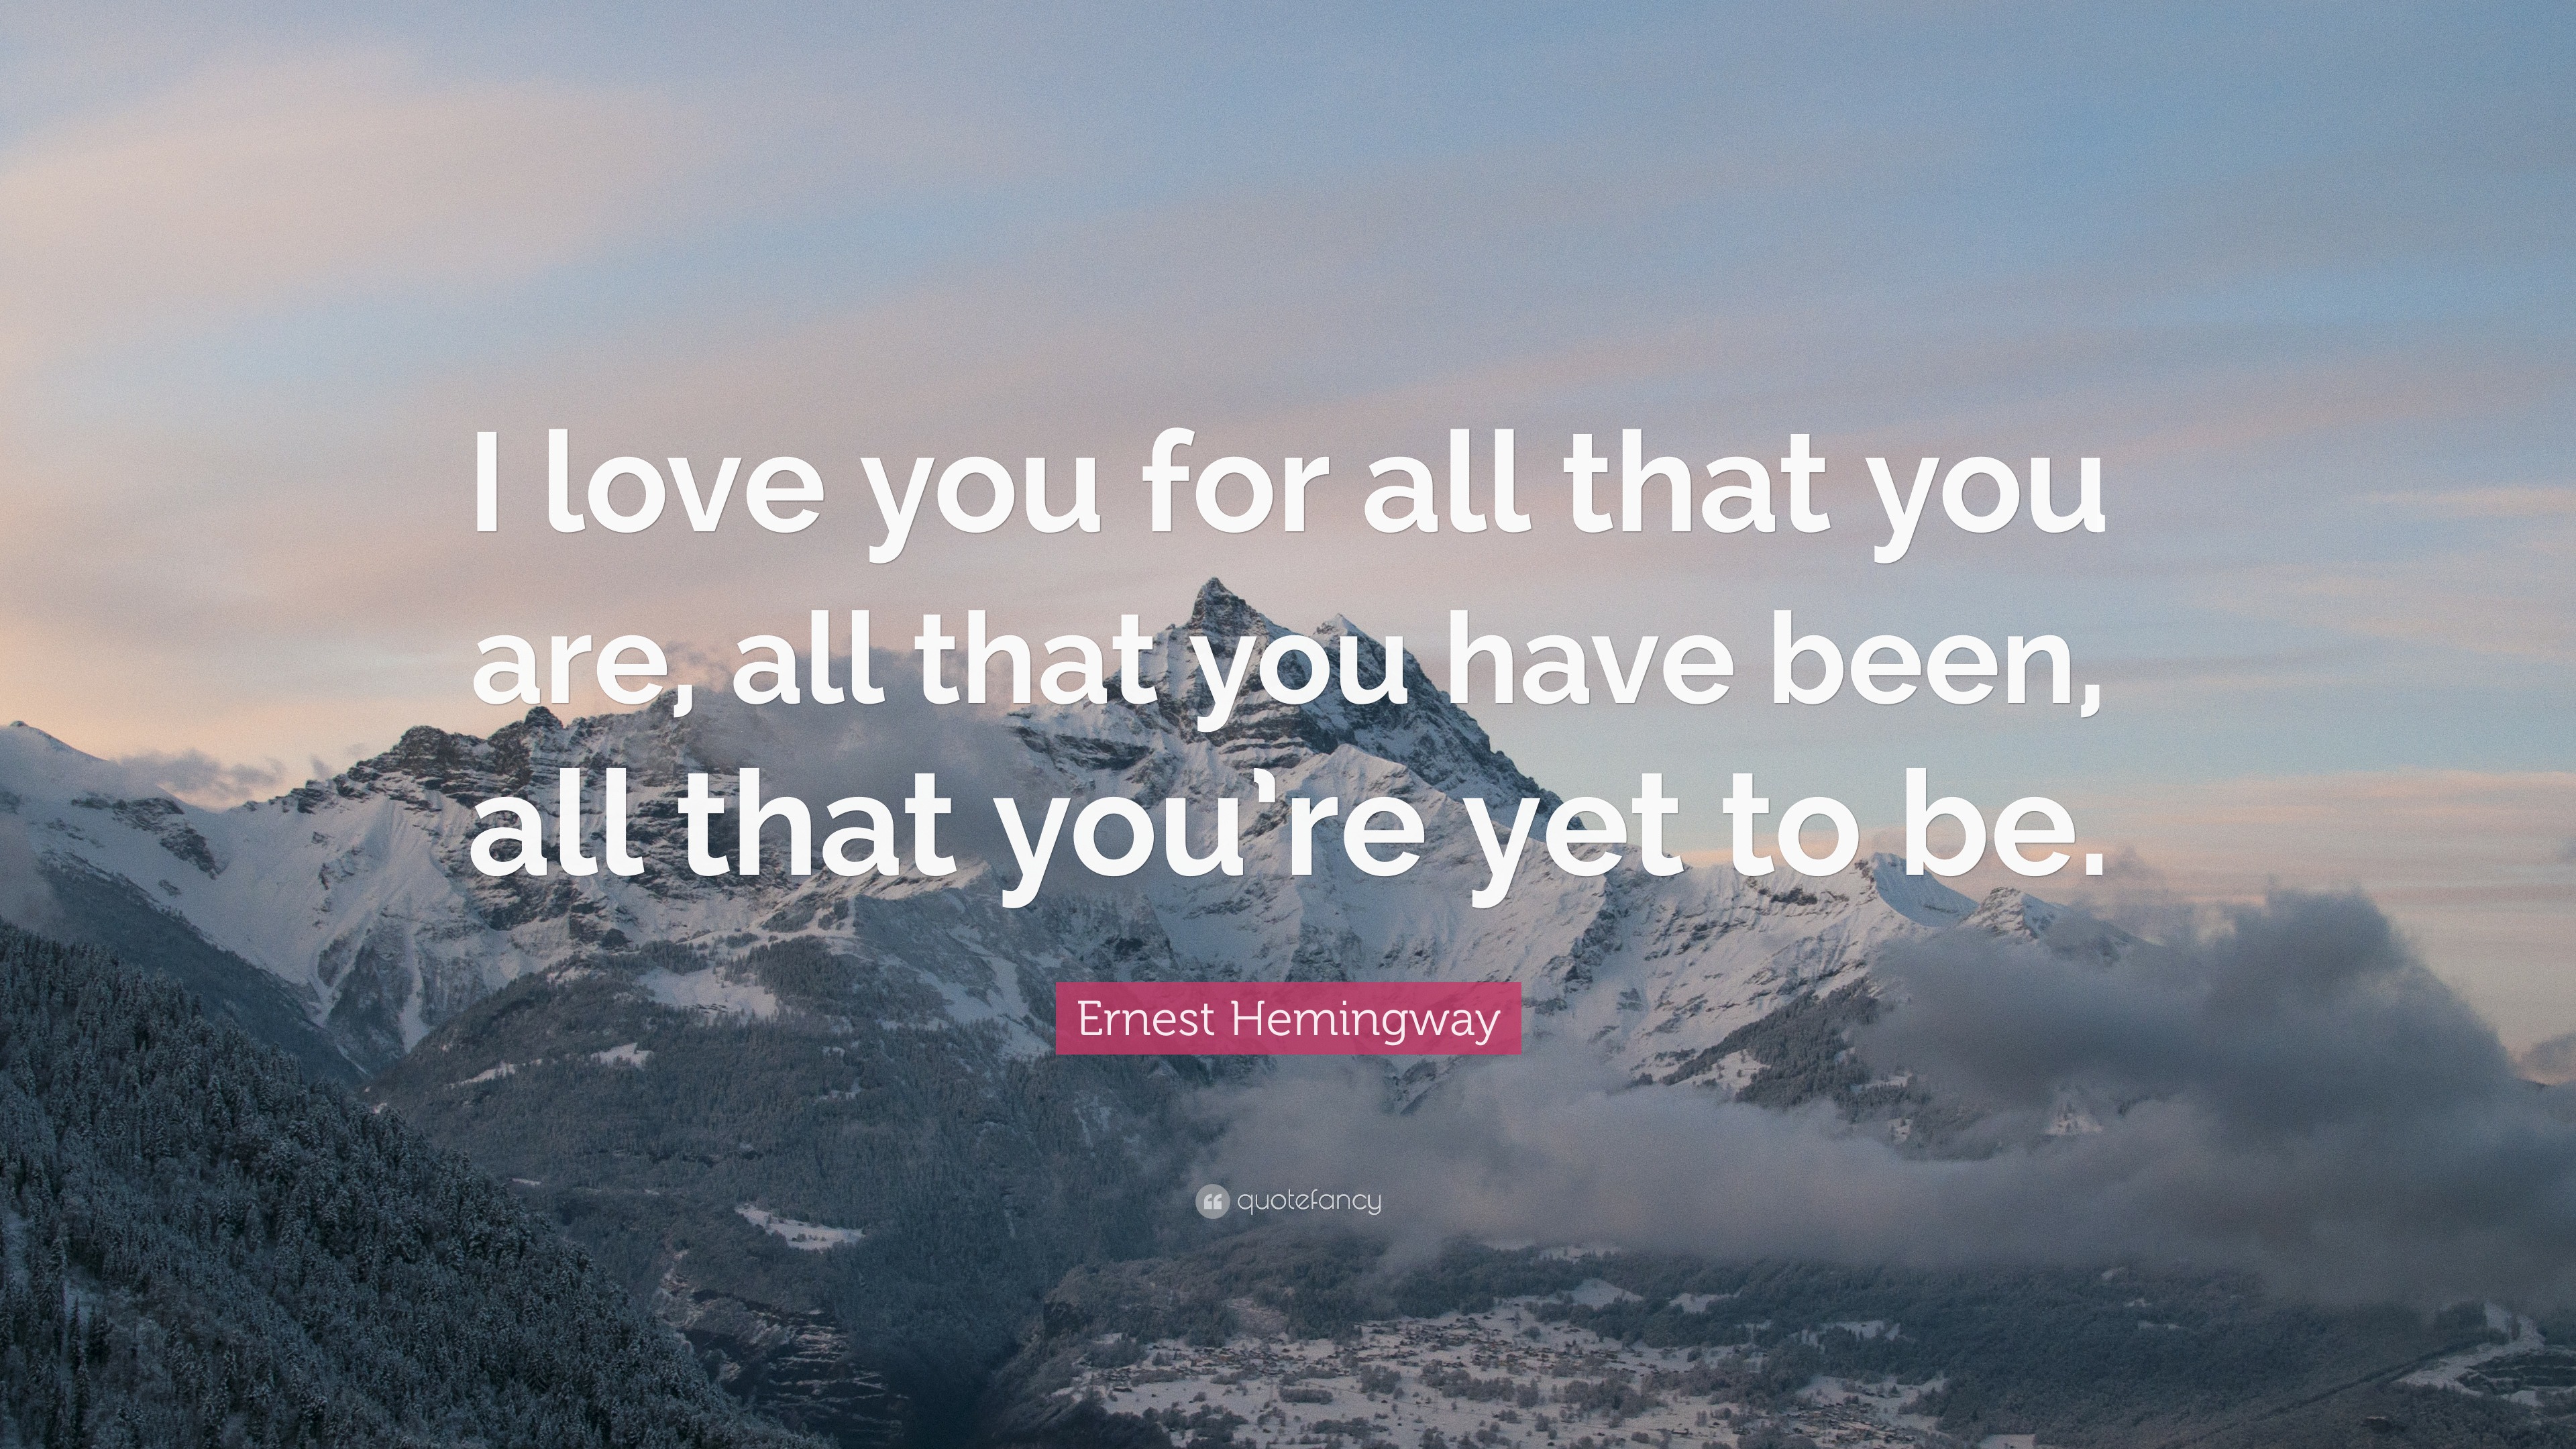 Ernest Hemingway Quote “I love you for all that you are all that